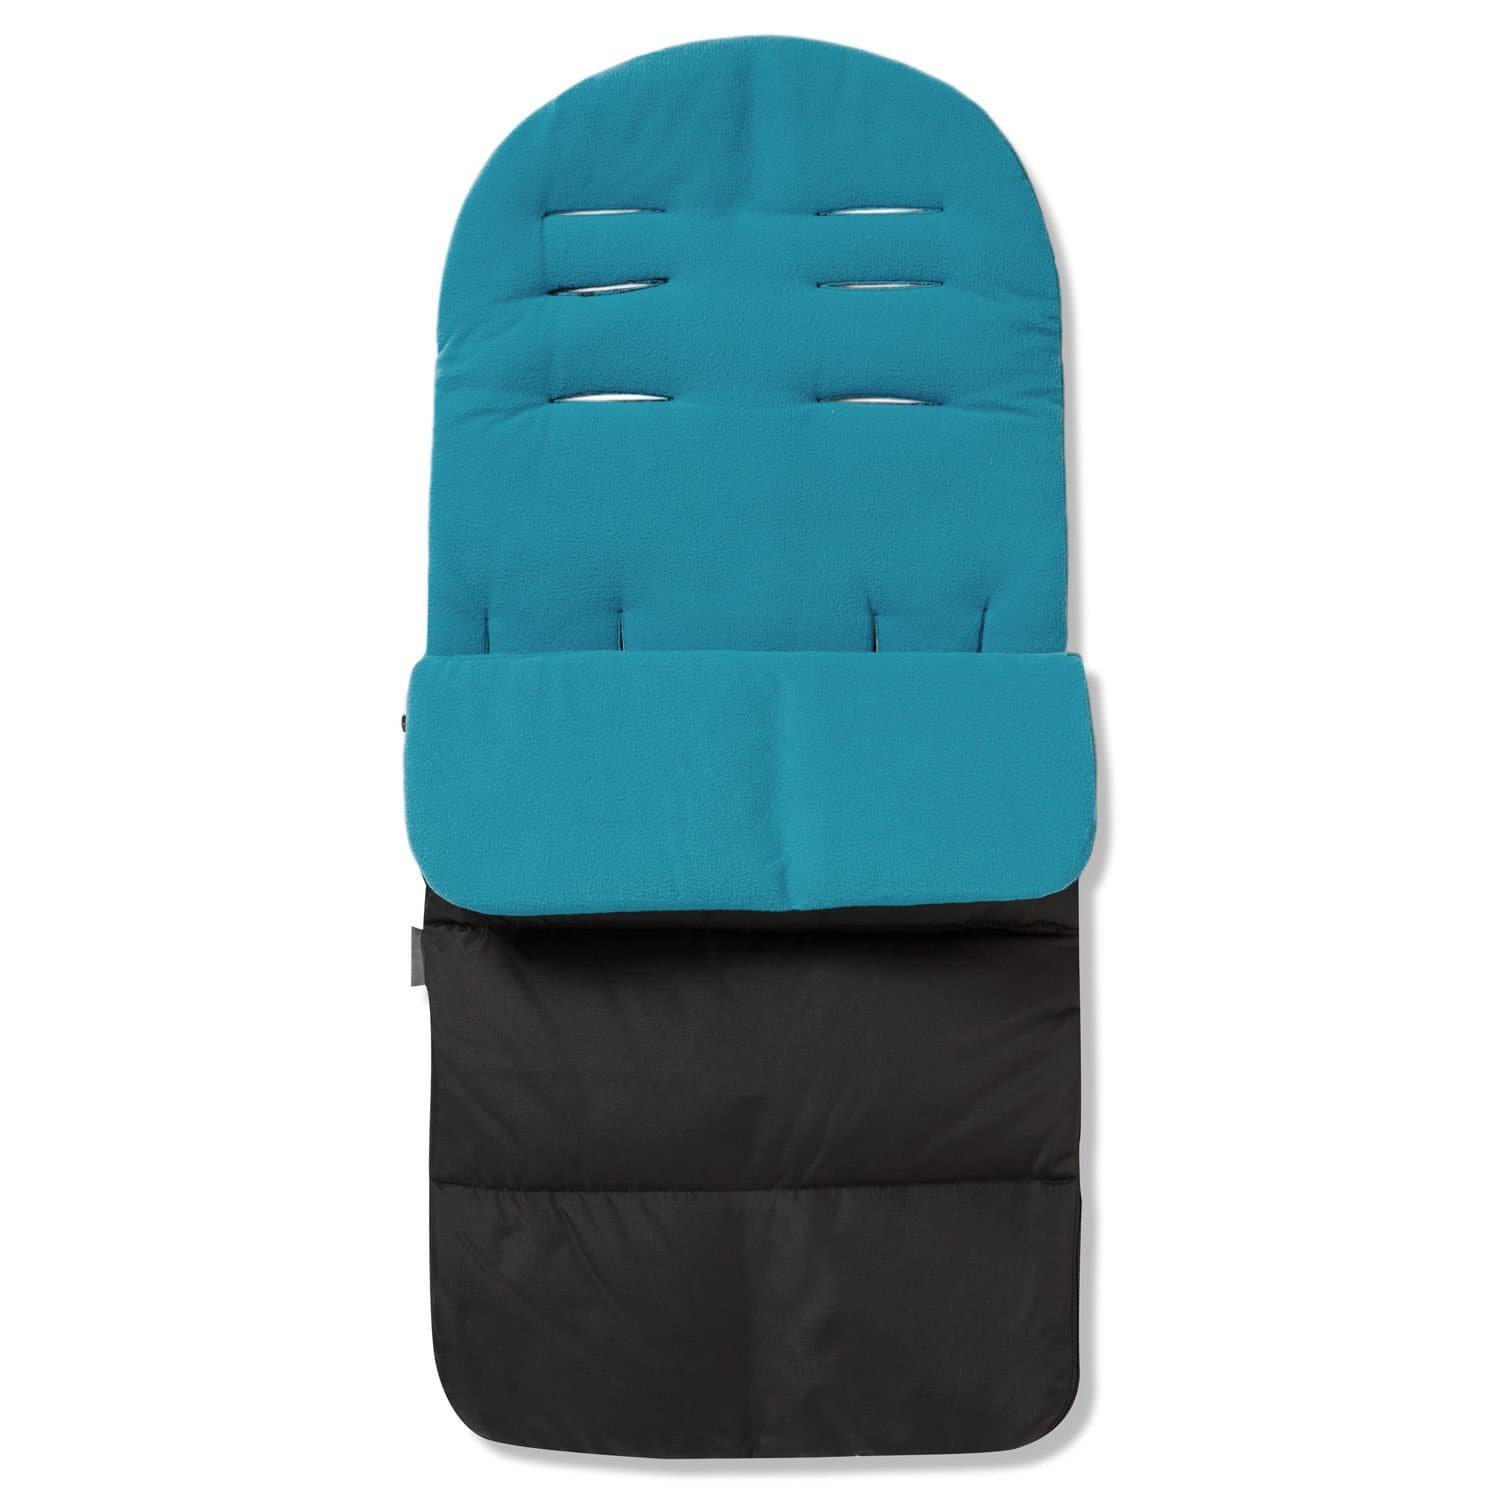 Premium Footmuff / Cosy Toes Compatible with Bugaboo - Ocean Blue / Fits All Models | For Your Little One